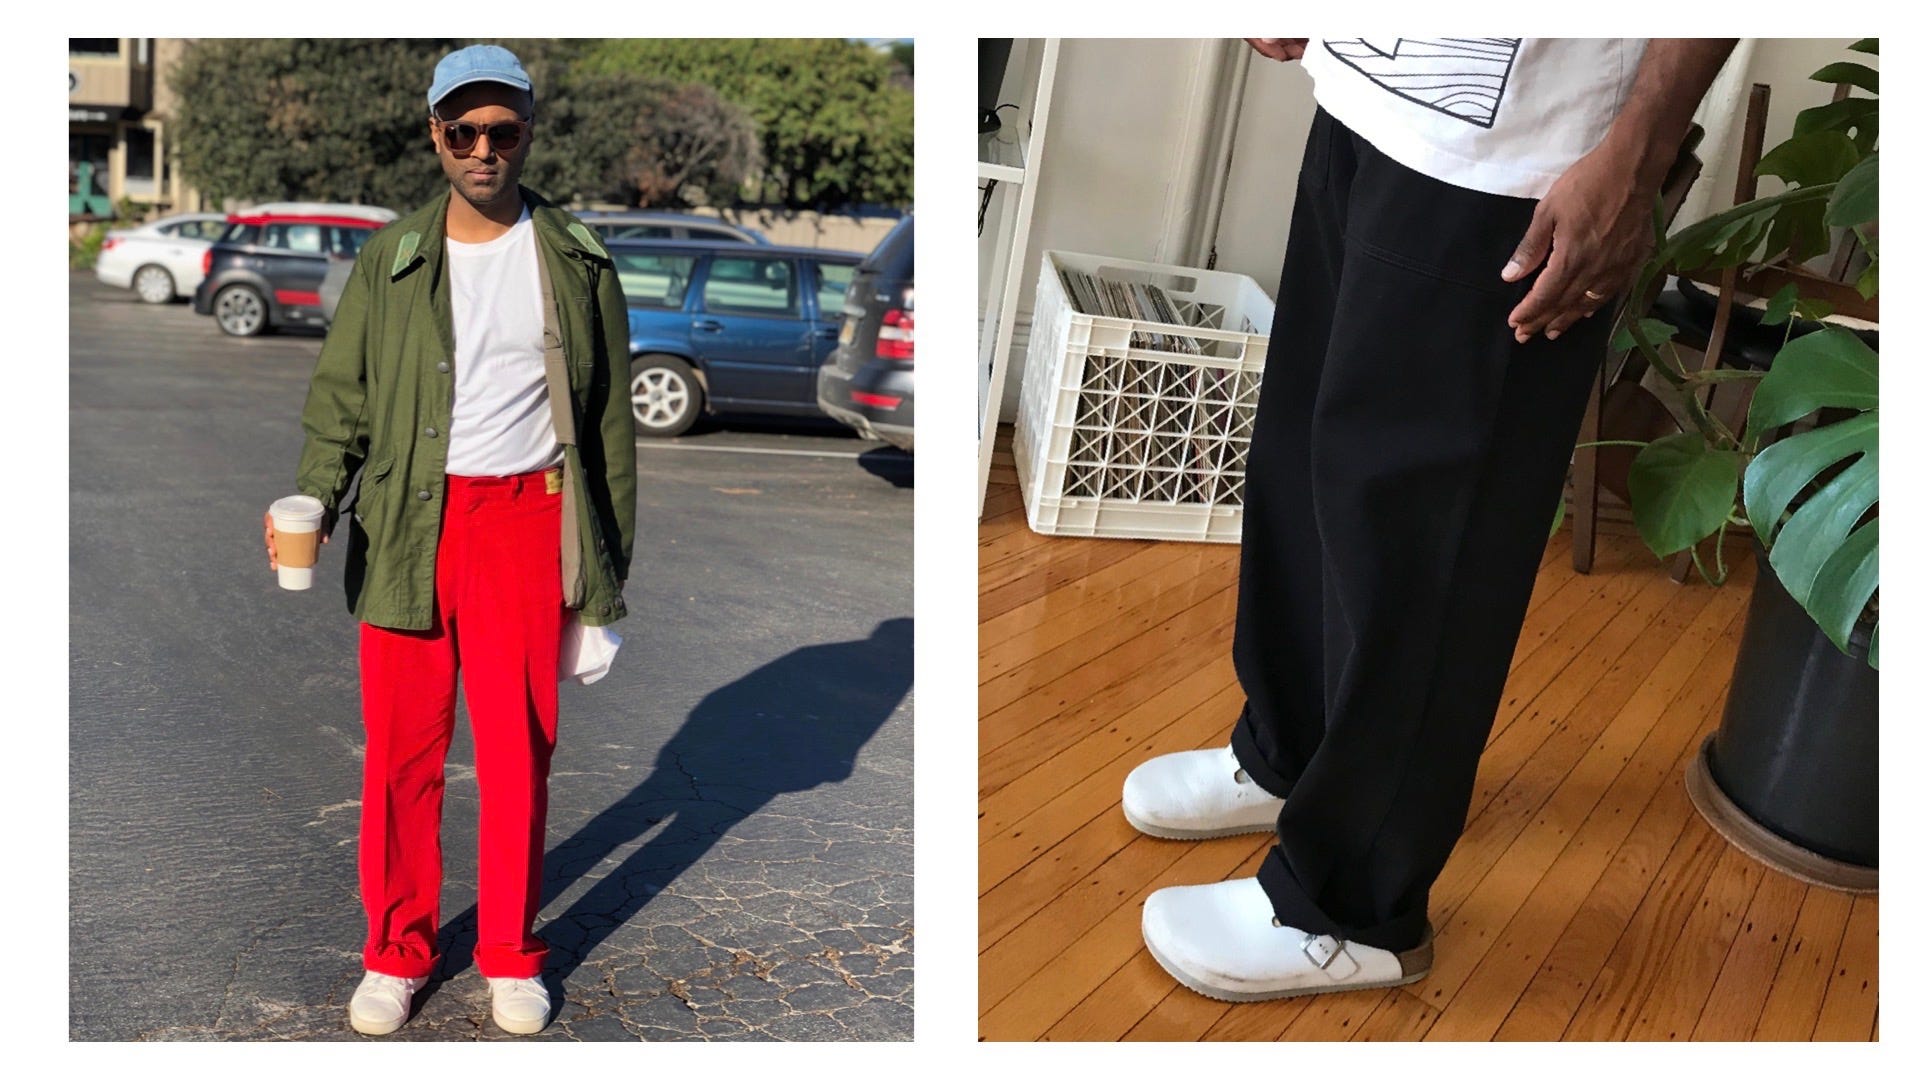 The Curtis-smiths (and More!) Show Us How To Wear Anti-fit Trousers